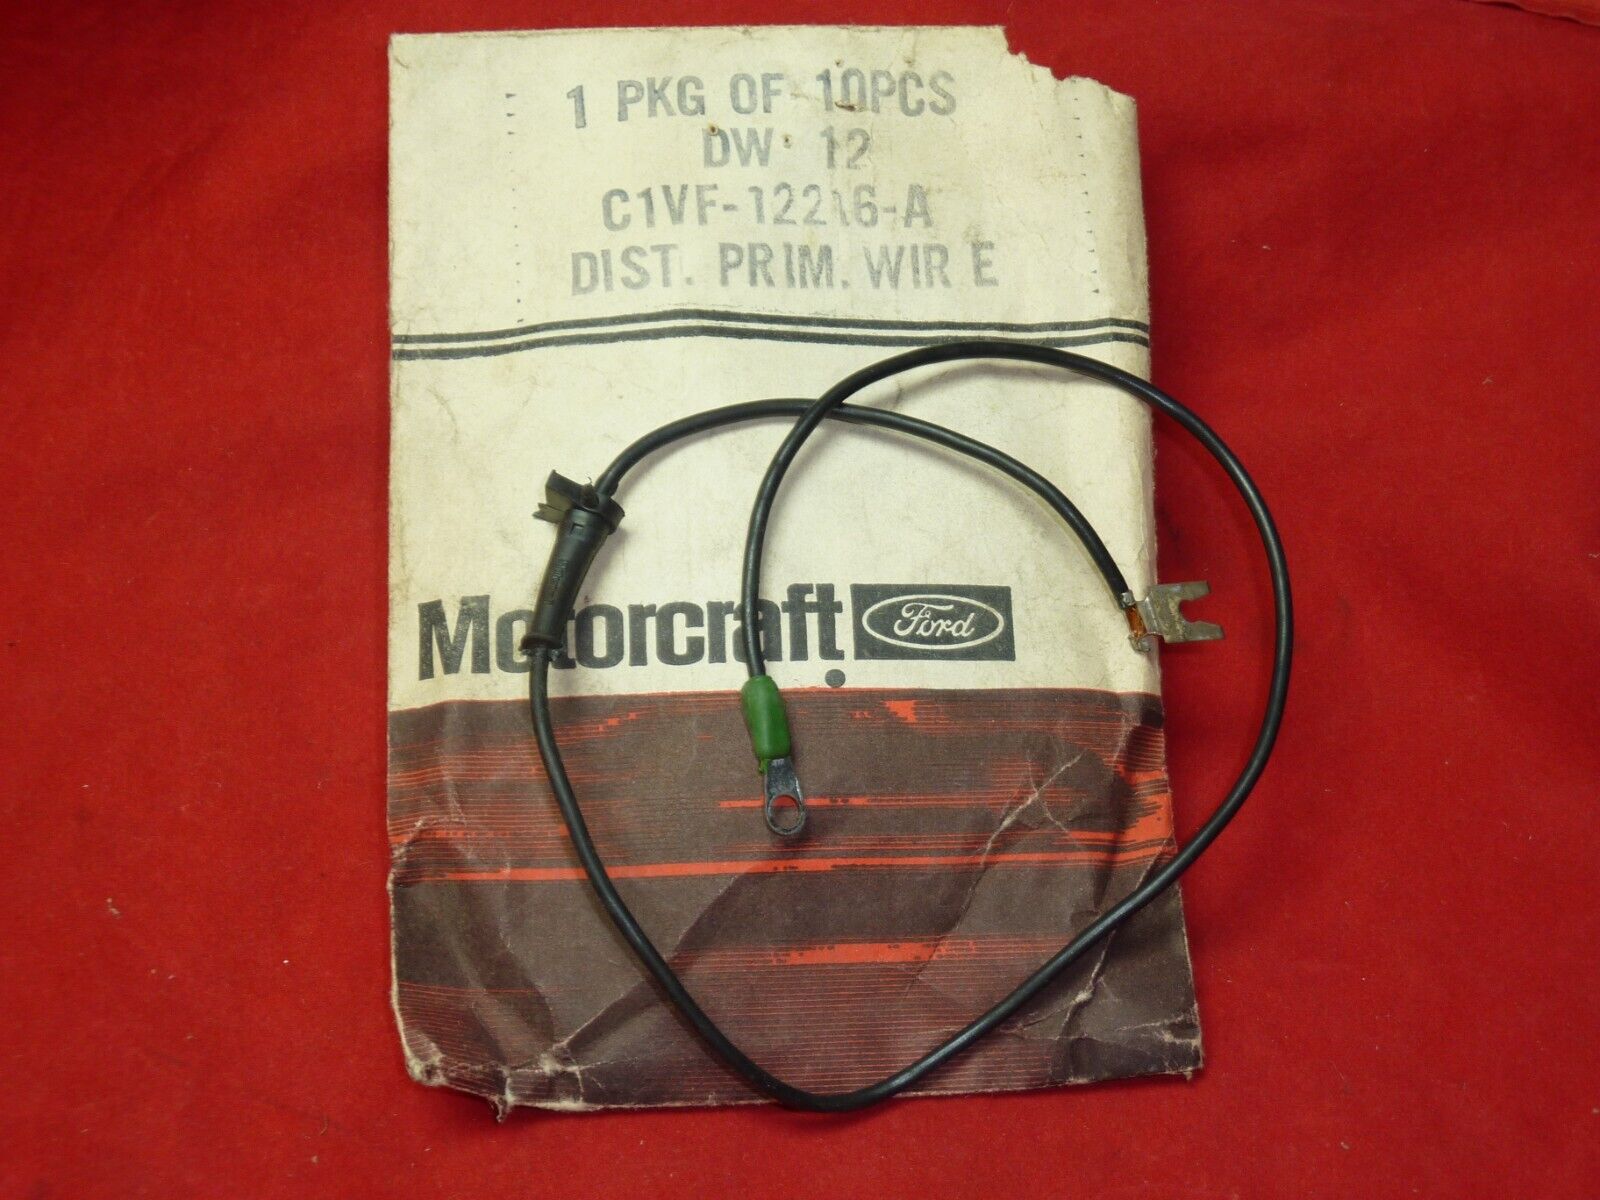 NOS 1965 1966 1967 FORD PRIMARY DISTRIBUTOR WIRE DW-12 MUSTANG BOSS 302 351 429